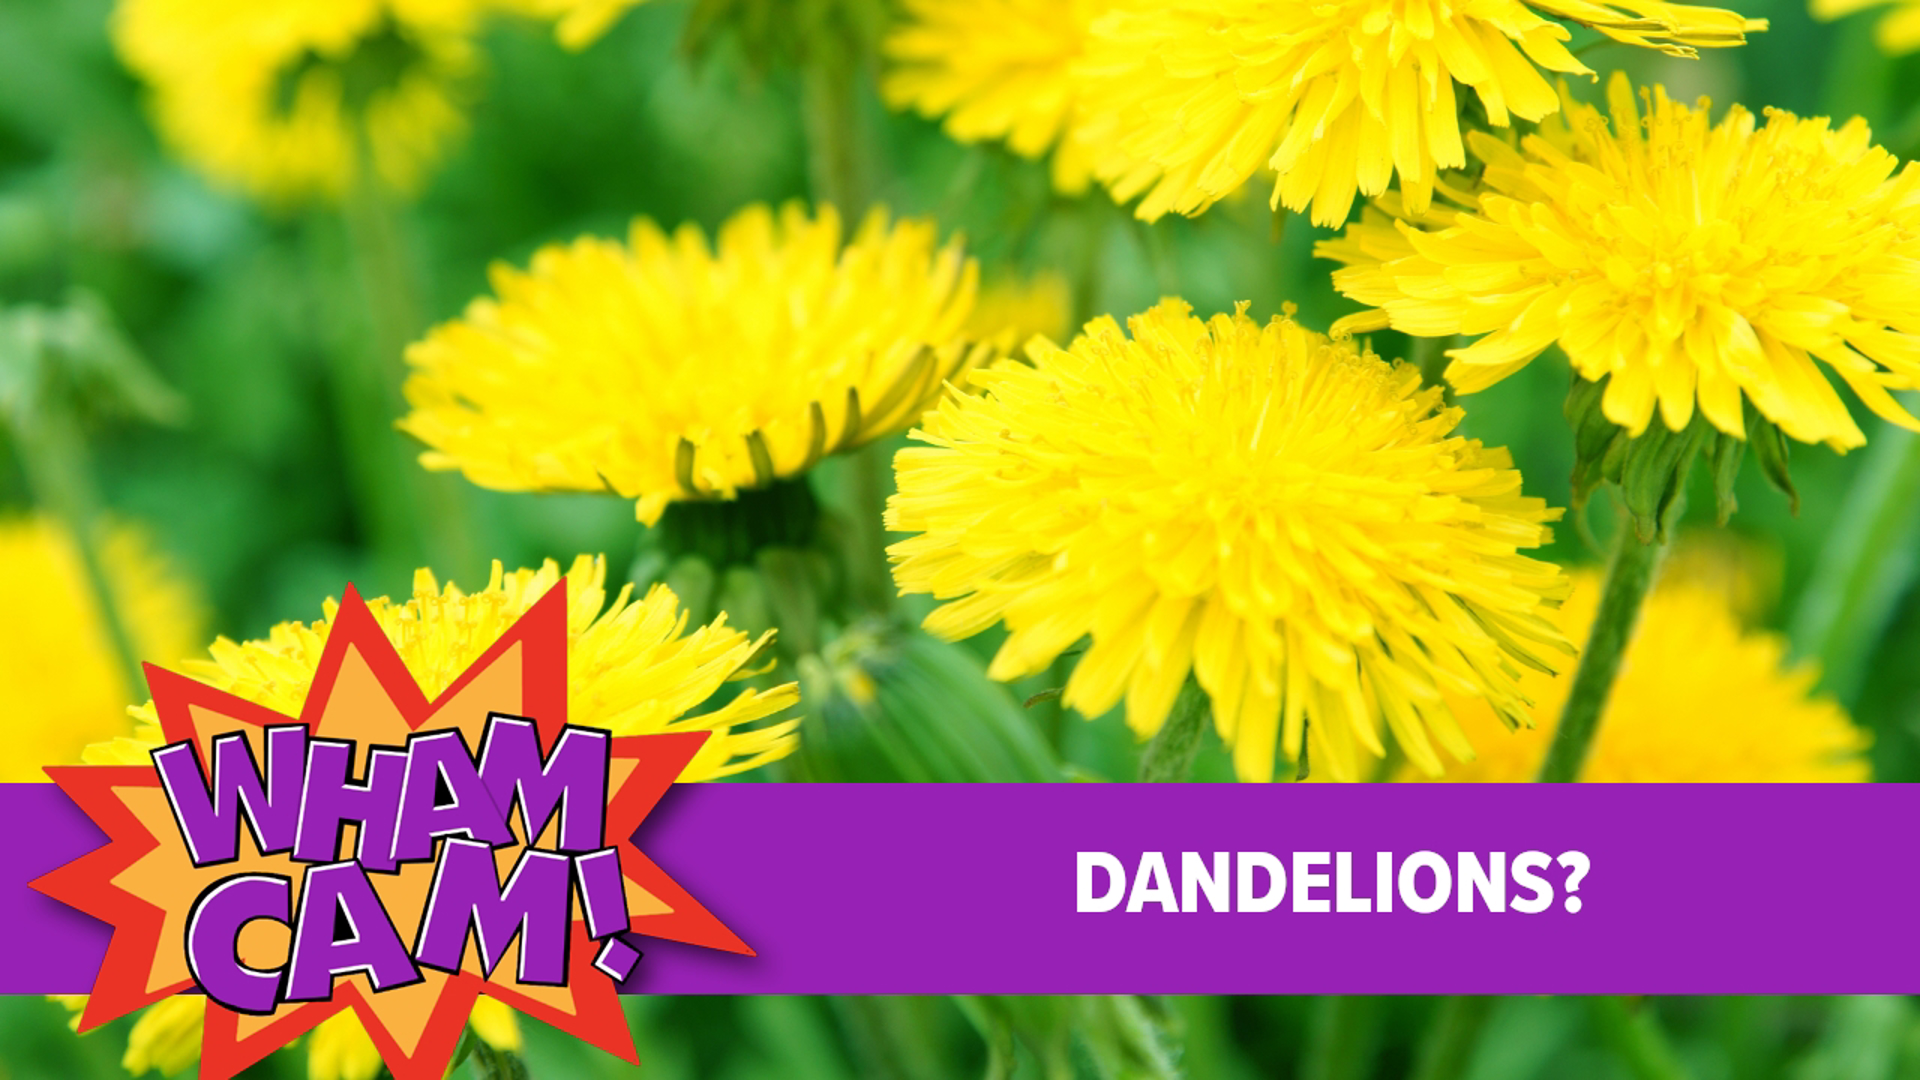 With spring here, that means dandelions are blooming. Ever wonder where they got their name? Find out in this week's Wham Cam.